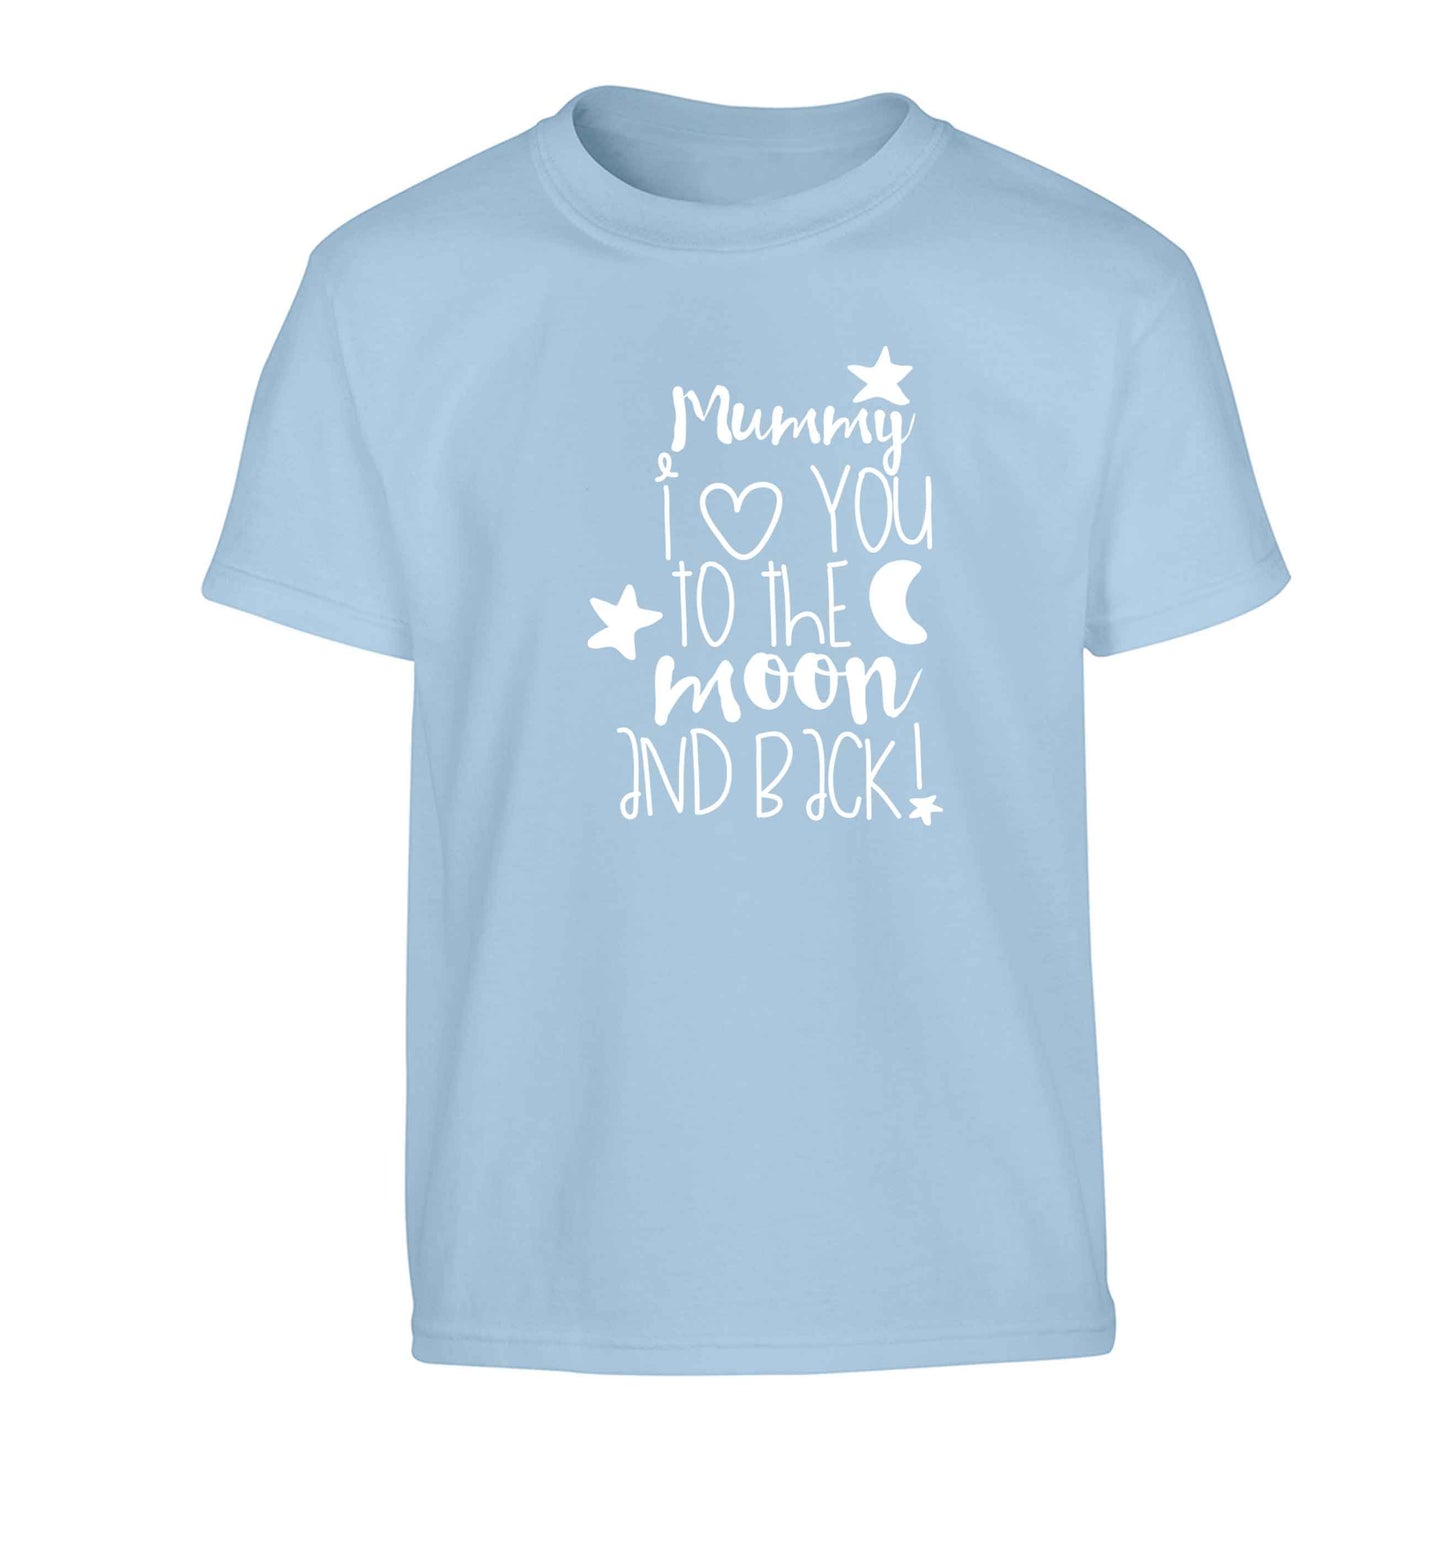 Mummy I love you to the moon and back Children's light blue Tshirt 12-13 Years